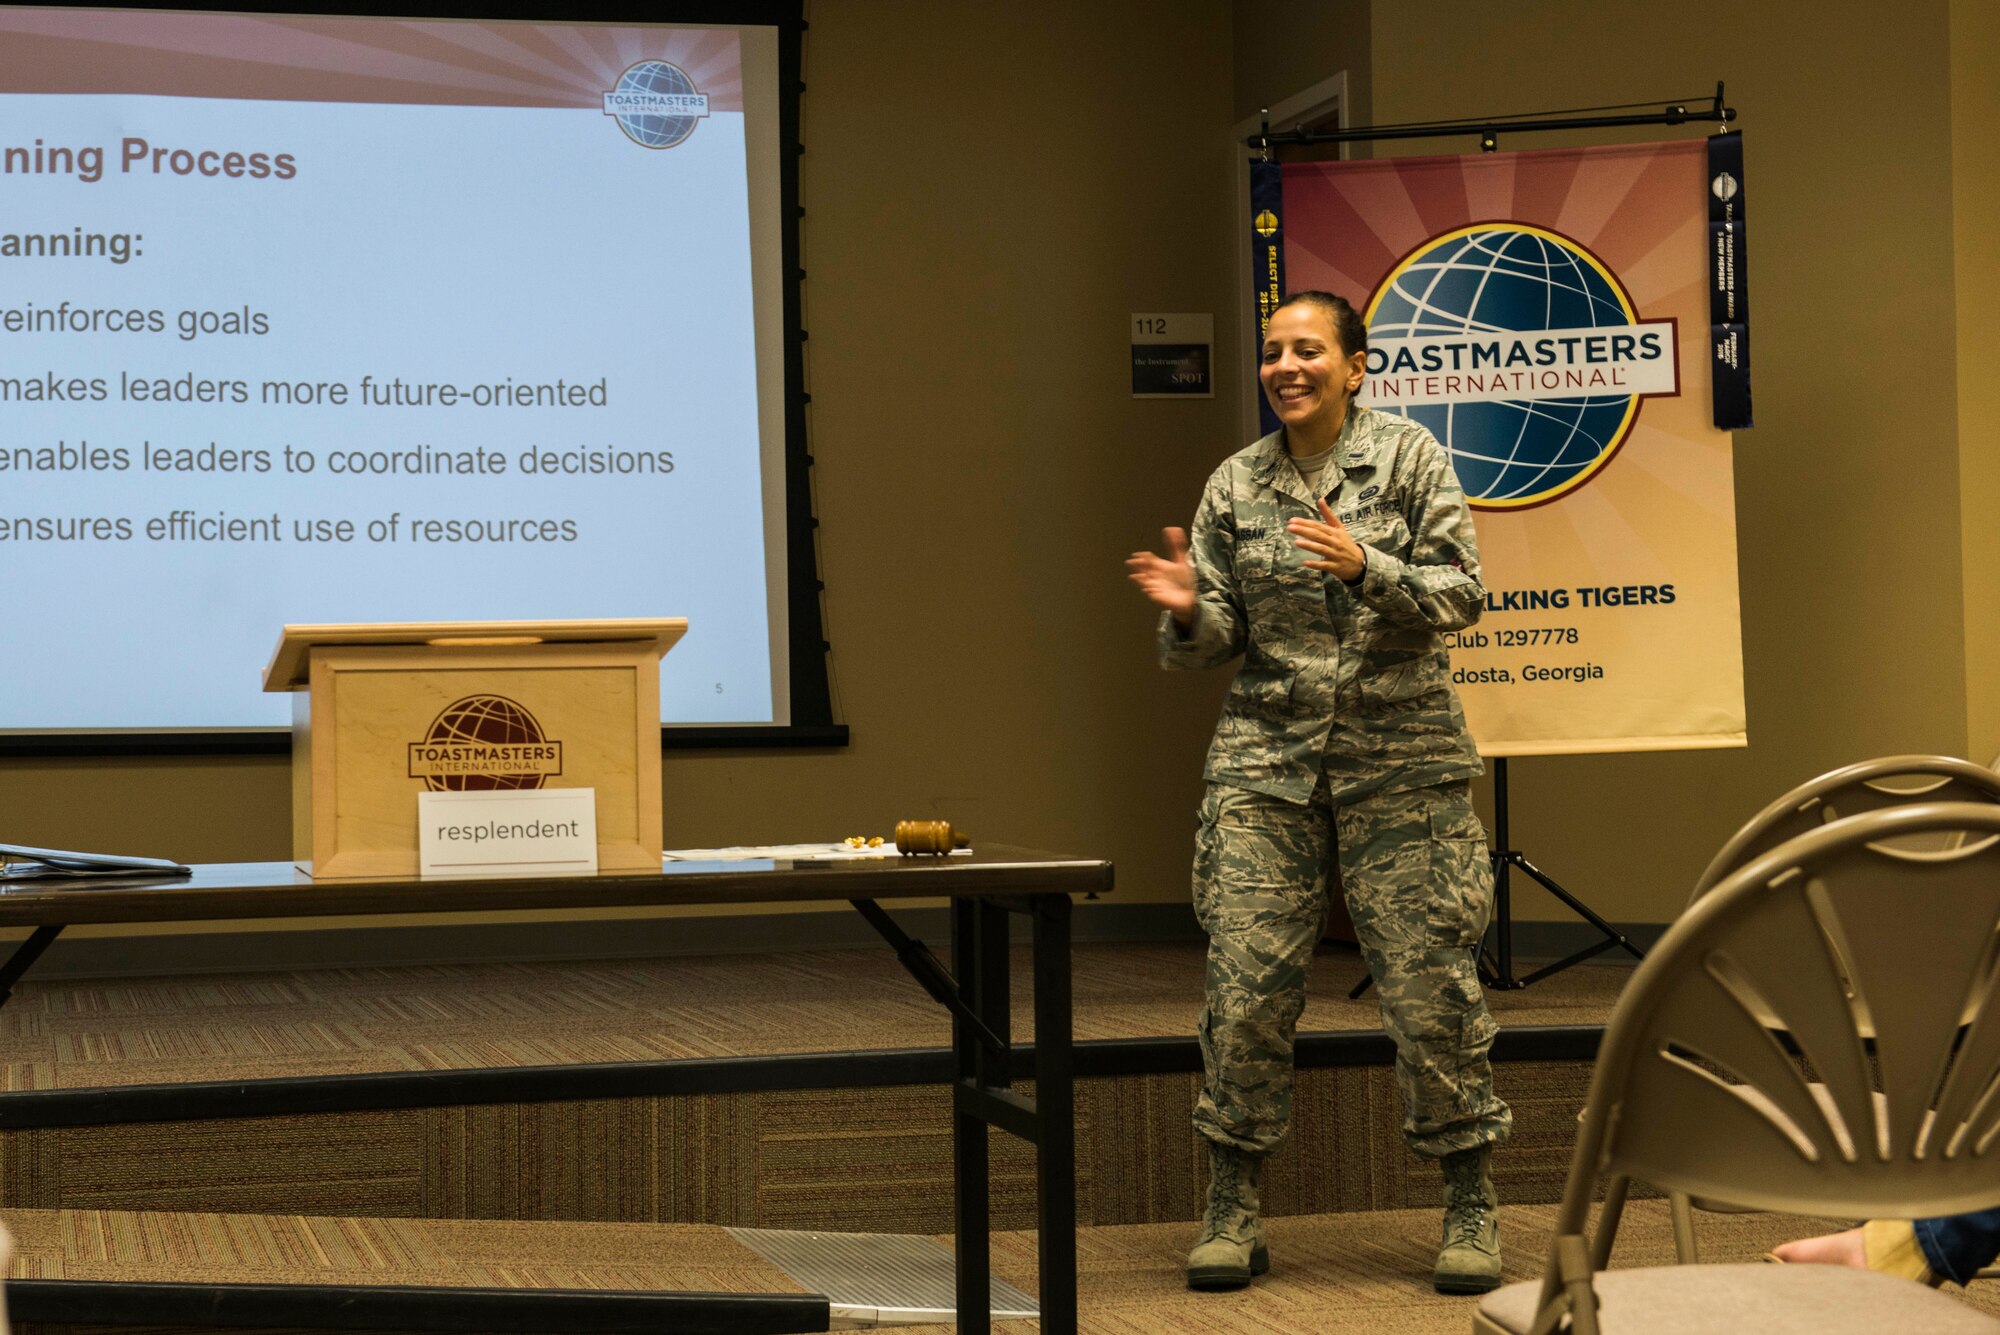 U.S. Air Force 1st Lt. Farrah Hassan, 23d Operations Support Squadron intelligence officer, performs an impromptu skit during the 2015 Moody Talking Tigers inauguration ceremony June 25, 2015, at Moody Air Force Base, Ga. Hassan and two other Talking Tigers performed skits and the audience voted on the best performance. (U.S. Air Force photo by Airman 1st Class Dillian Bamman/Released)